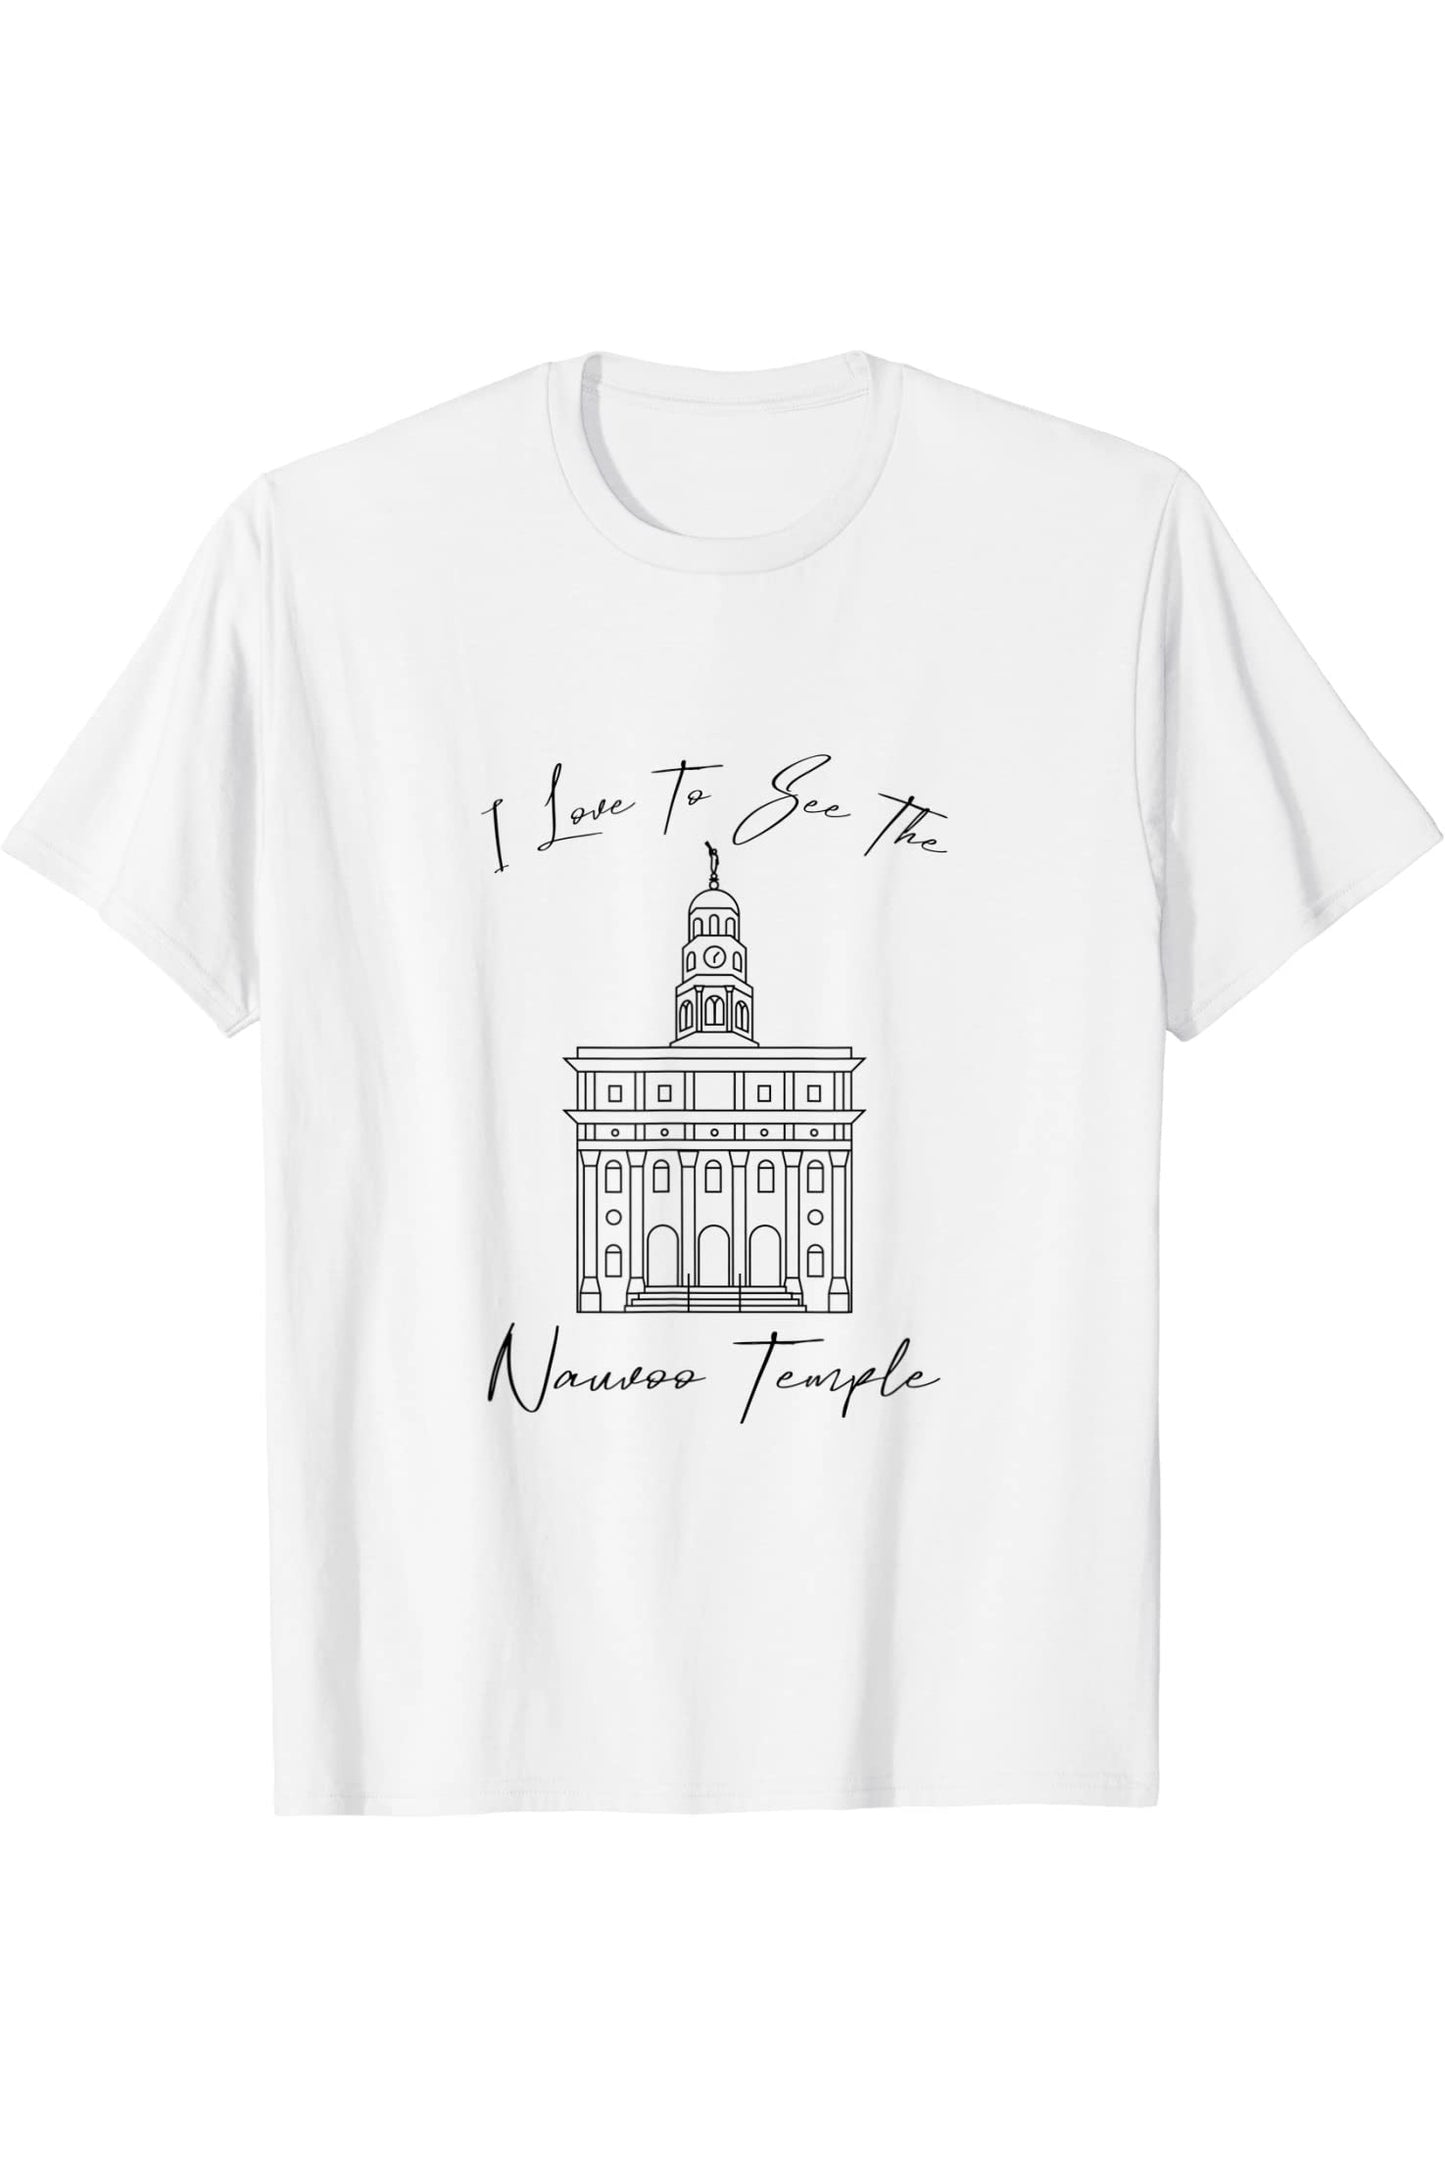 Nauvoo IL Tempel, I love to see my temple, calligraphy T-Shirt